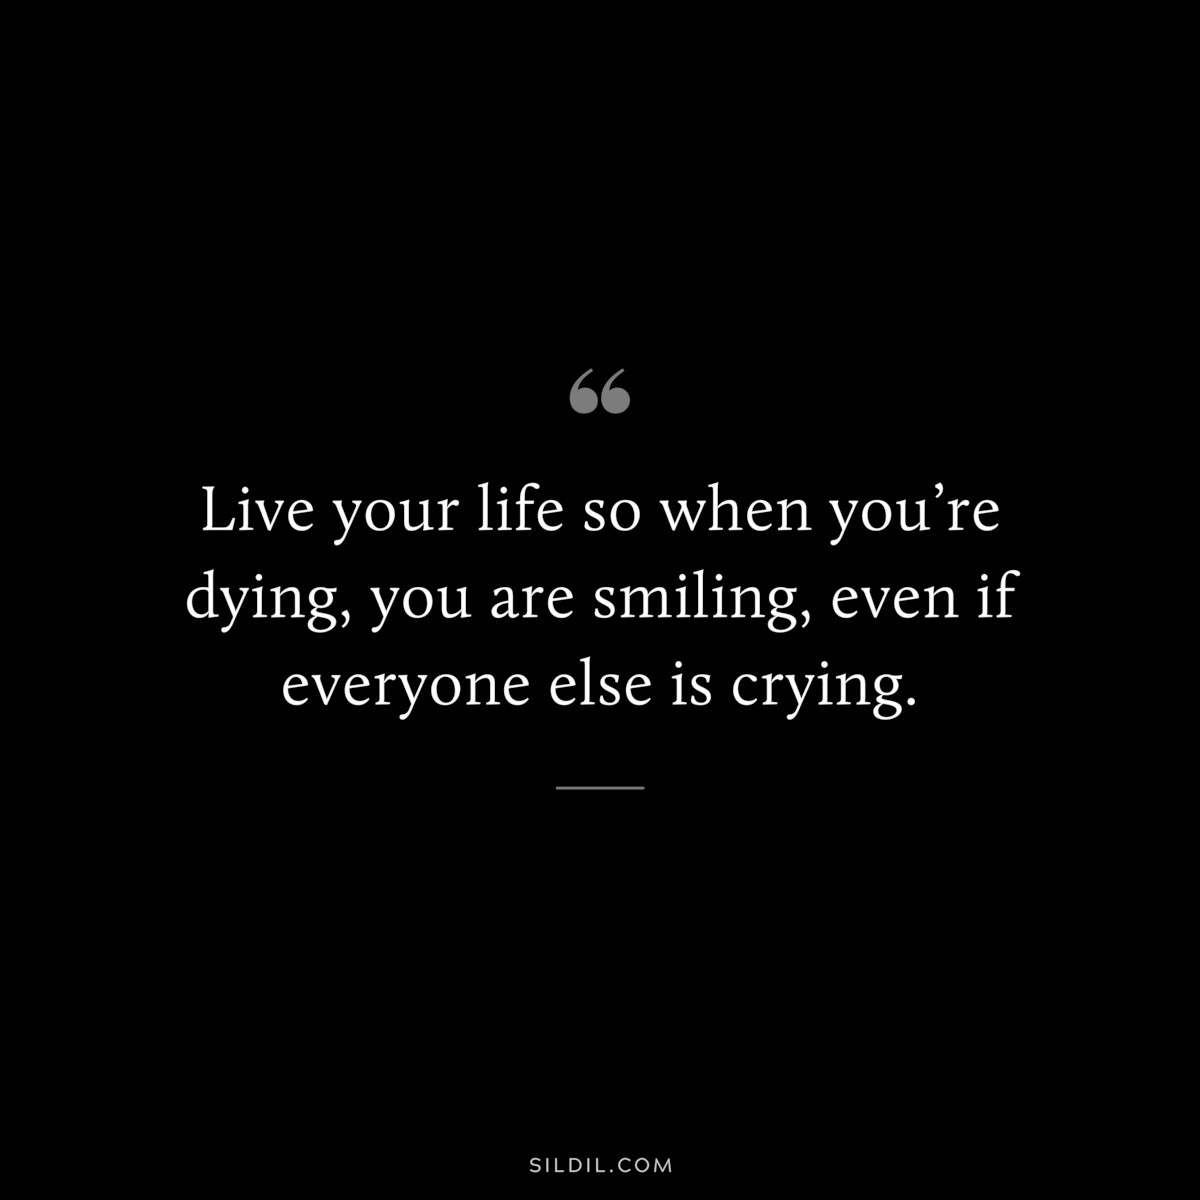 Live your life so when you’re dying, you are smiling, even if everyone else is crying.